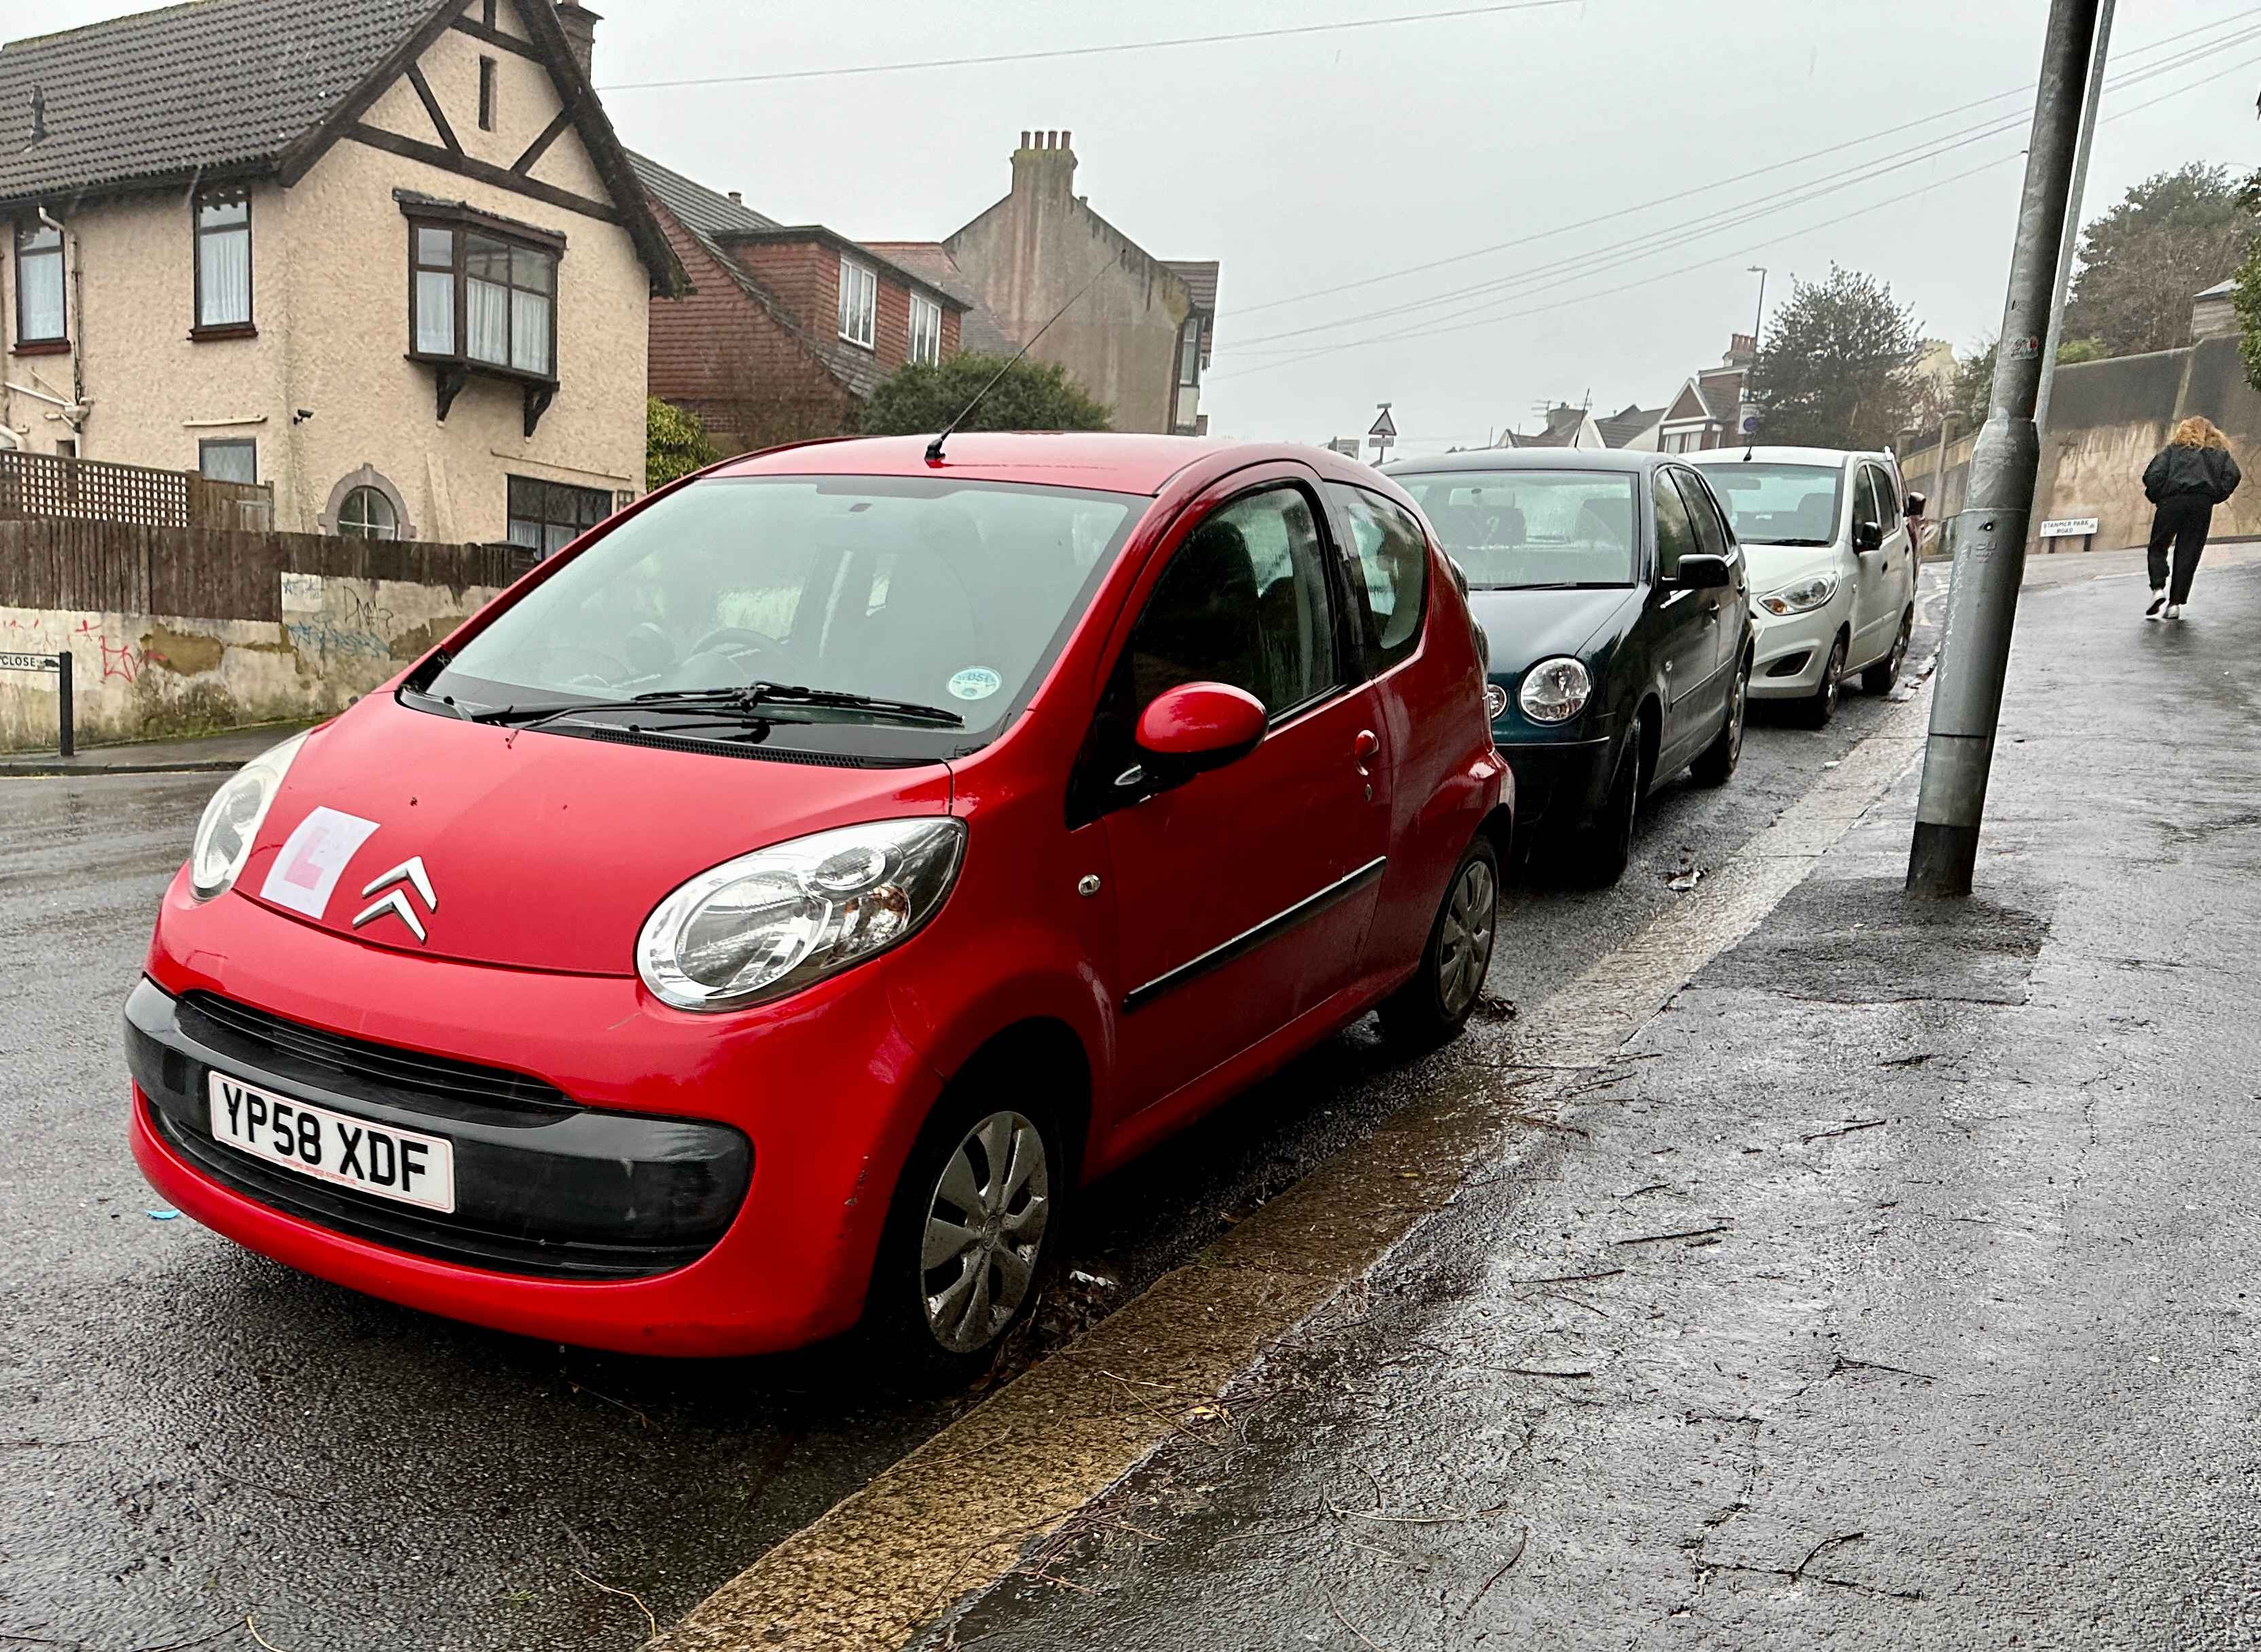 Photograph of YP58 XDF - a Red Citroen C1 parked in Hollingdean by a non-resident, and potentially abandoned. The second of five photographs supplied by the residents of Hollingdean.